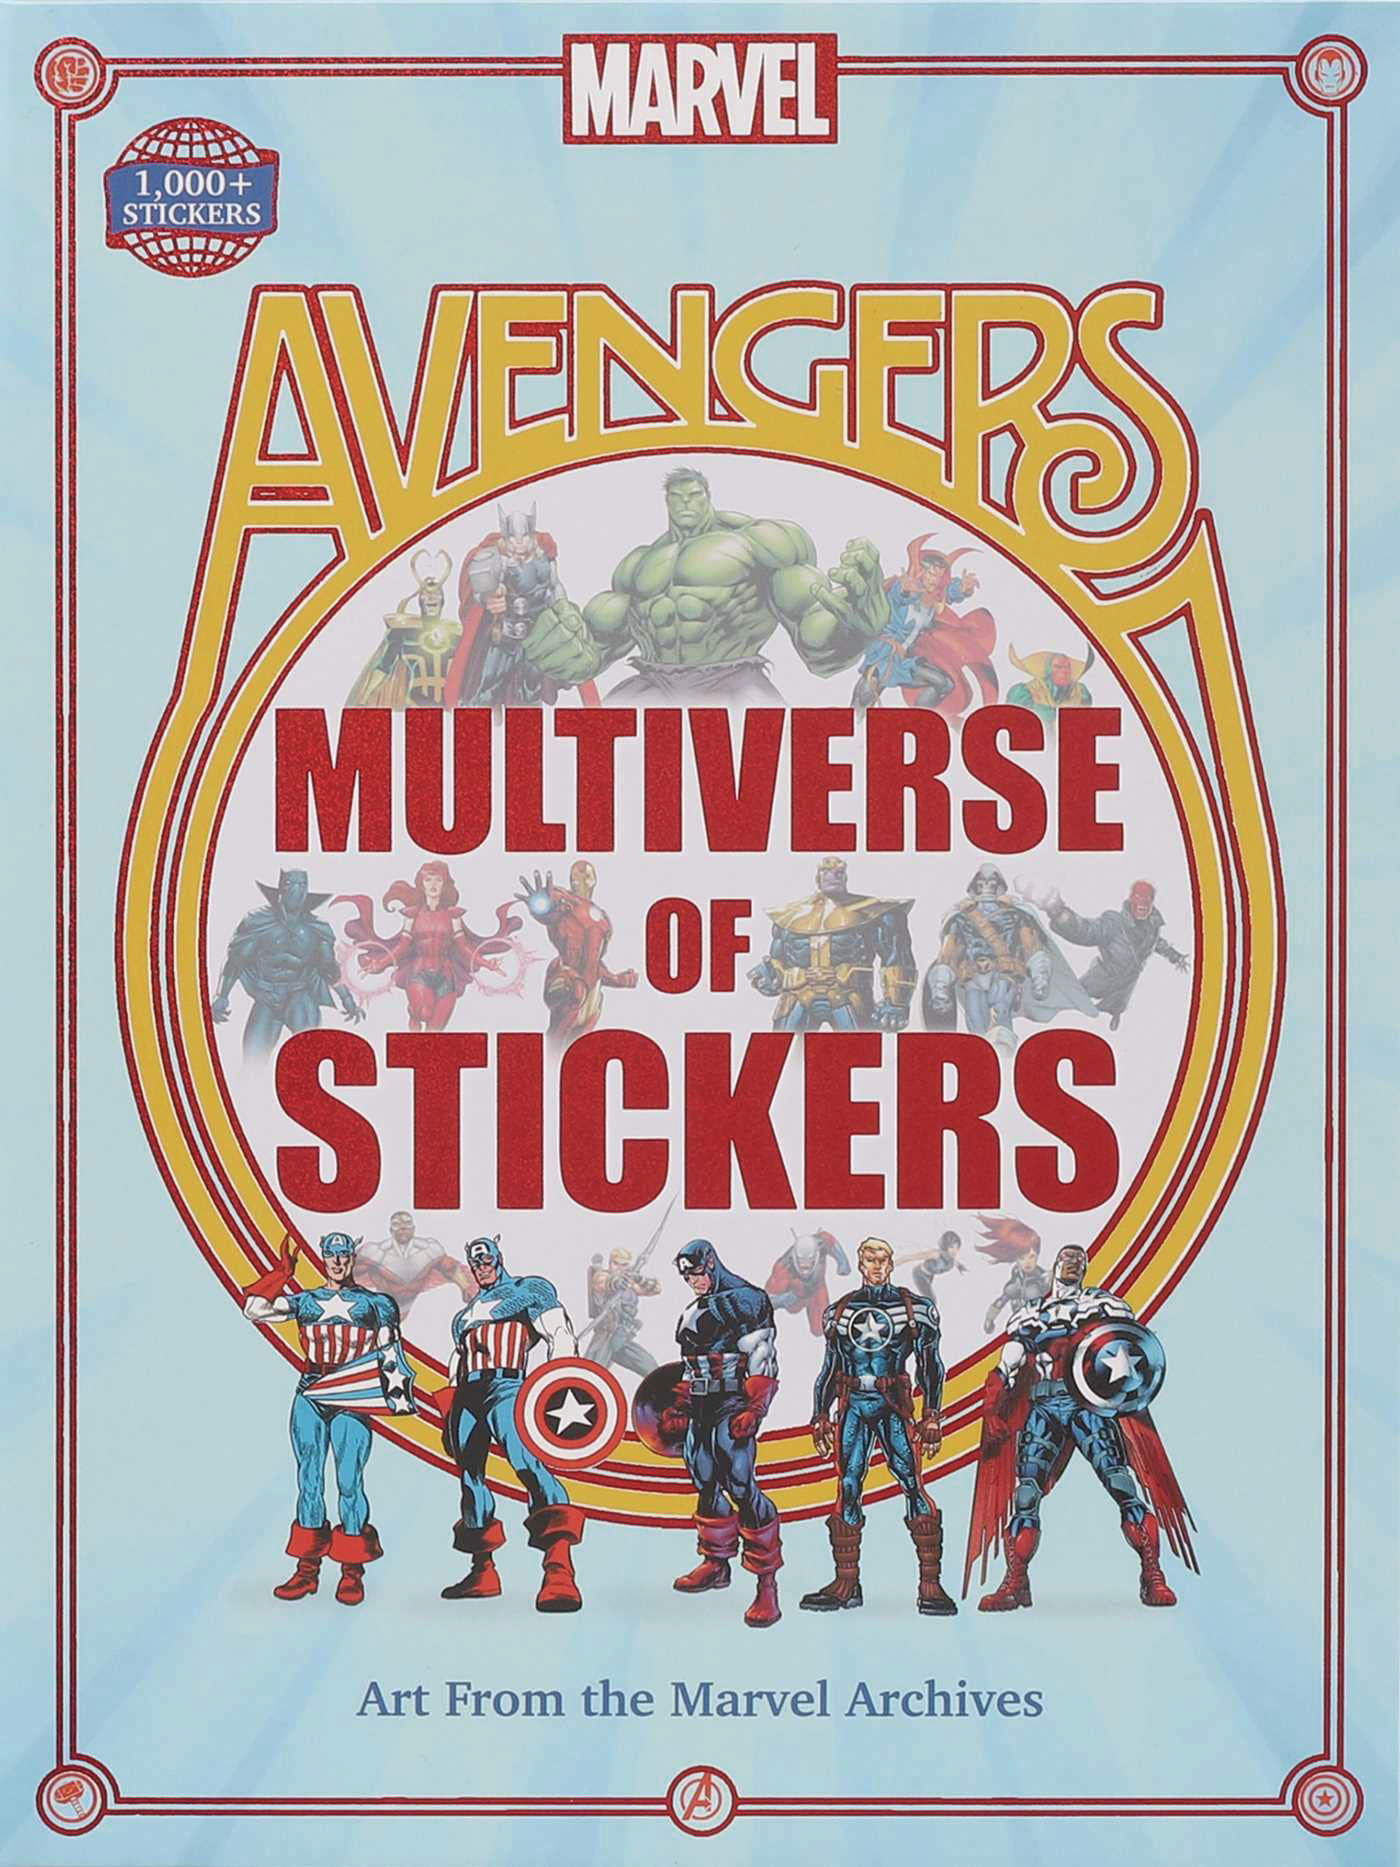 Marvel Avengers Multiverse of Stickers Hardcover